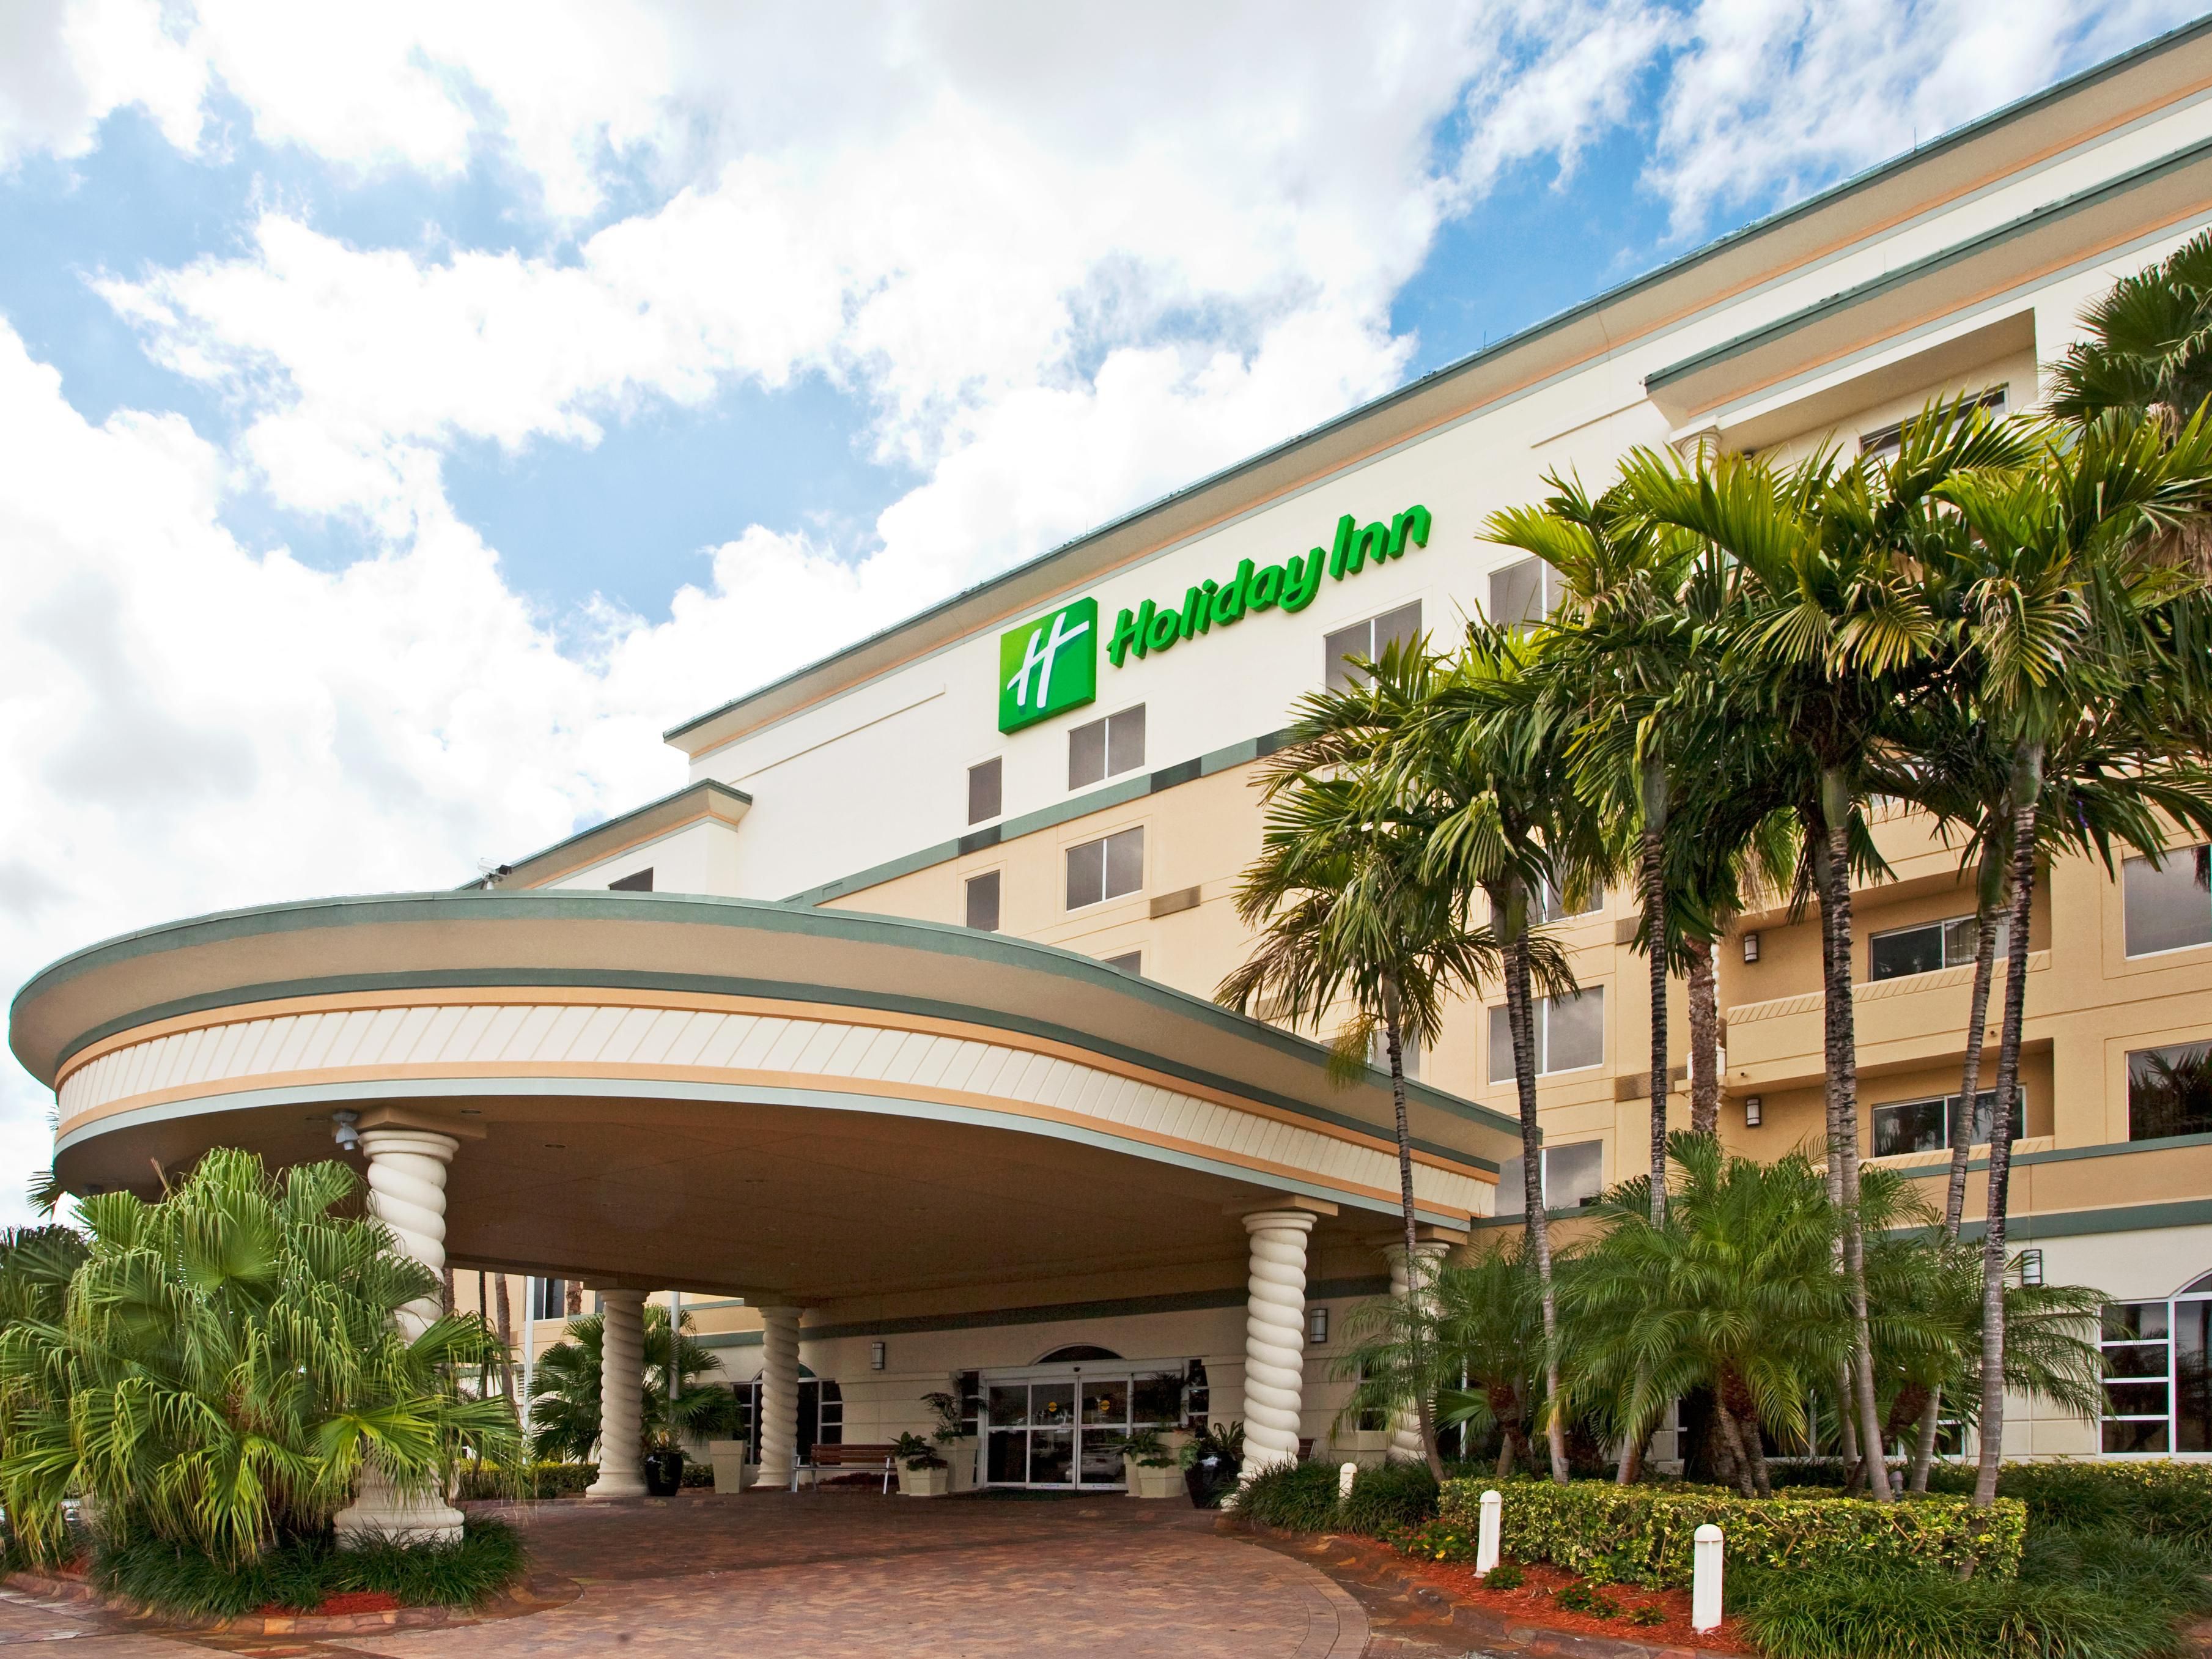 Hollywood Hotels | Top 40 Hotels in Hollywood, FL by IHG